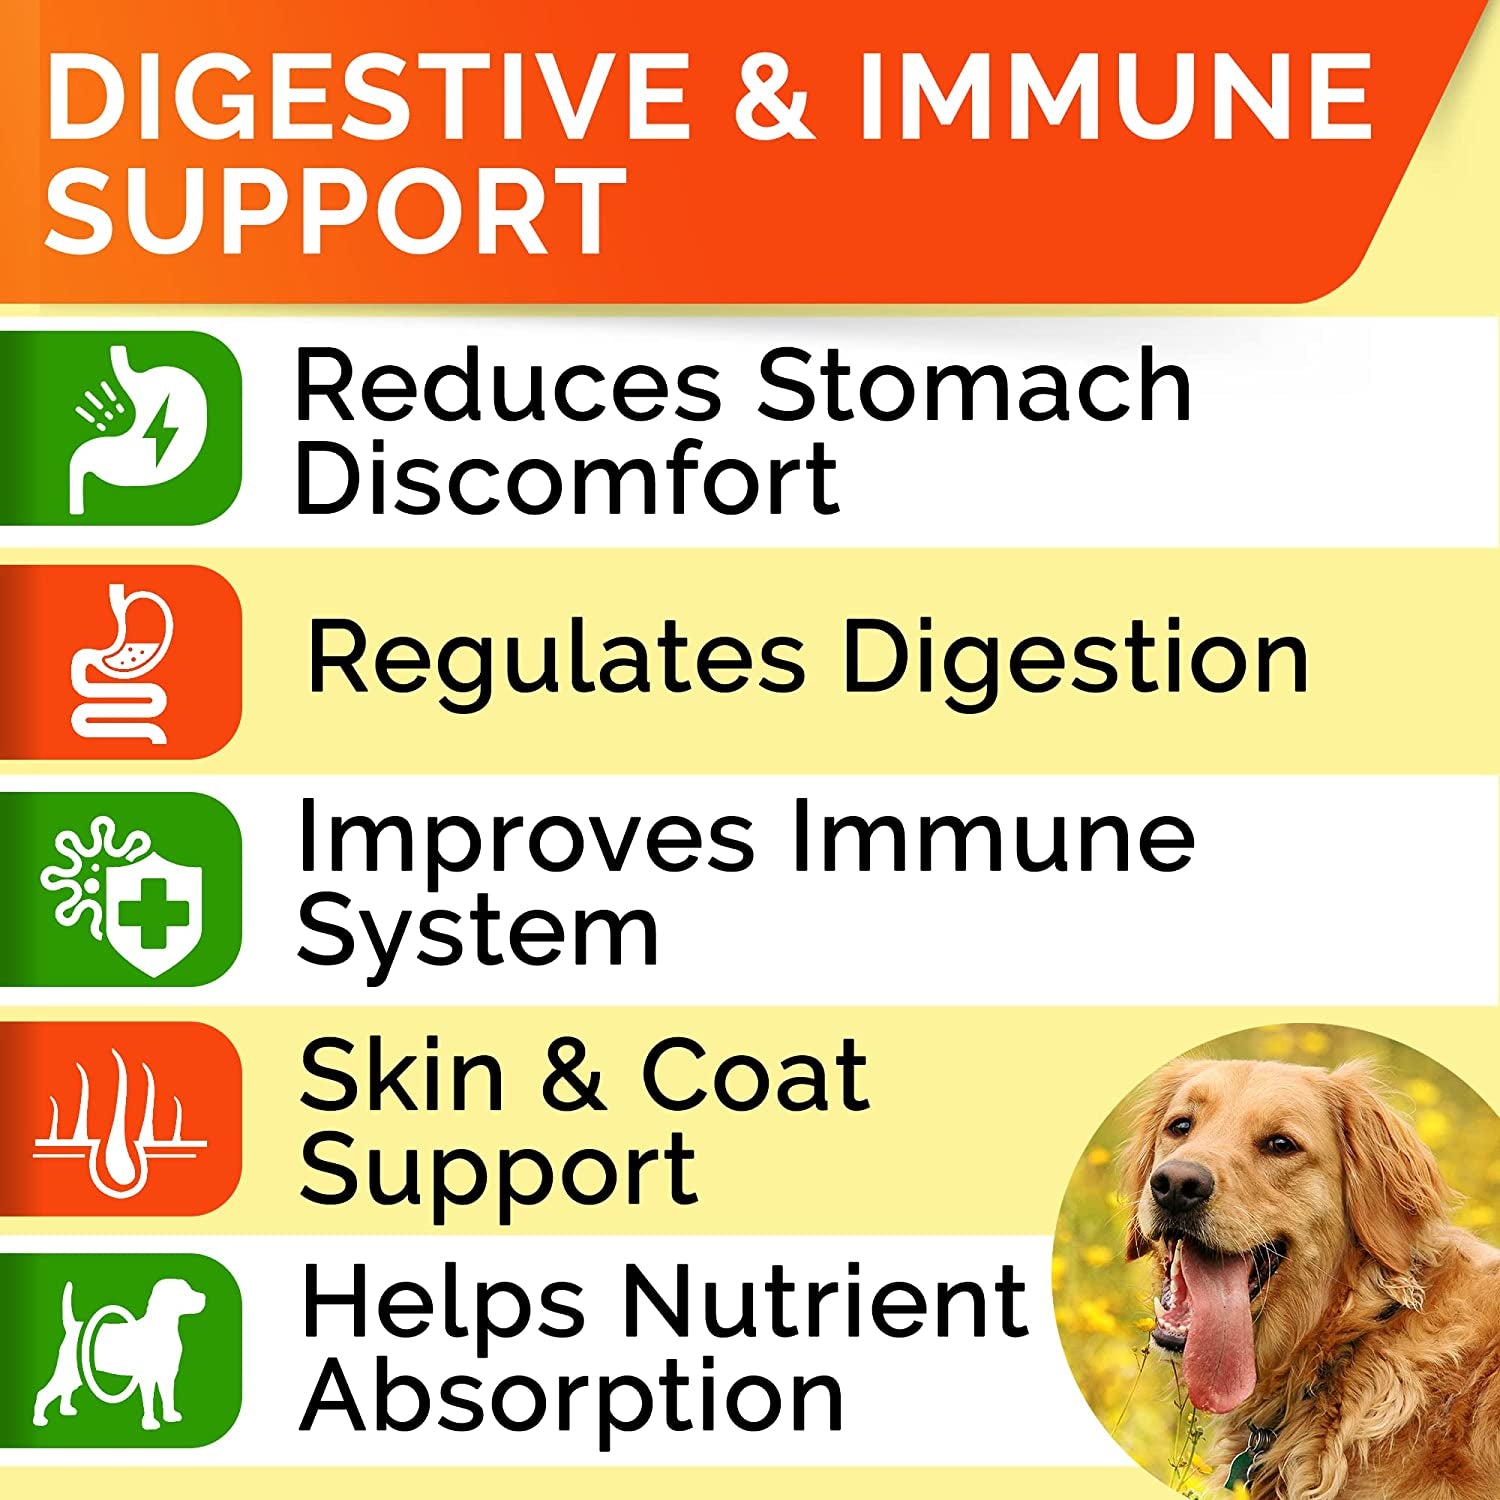 Dog Probiotics Treats for Picky Eaters - Digestive Enzymes + Prebiotics - Chewable Fiber Supplement - Allergy, Diarrhea, Gas, Constipation, Upset Stomach Relief - Improve Digestion&Immunity